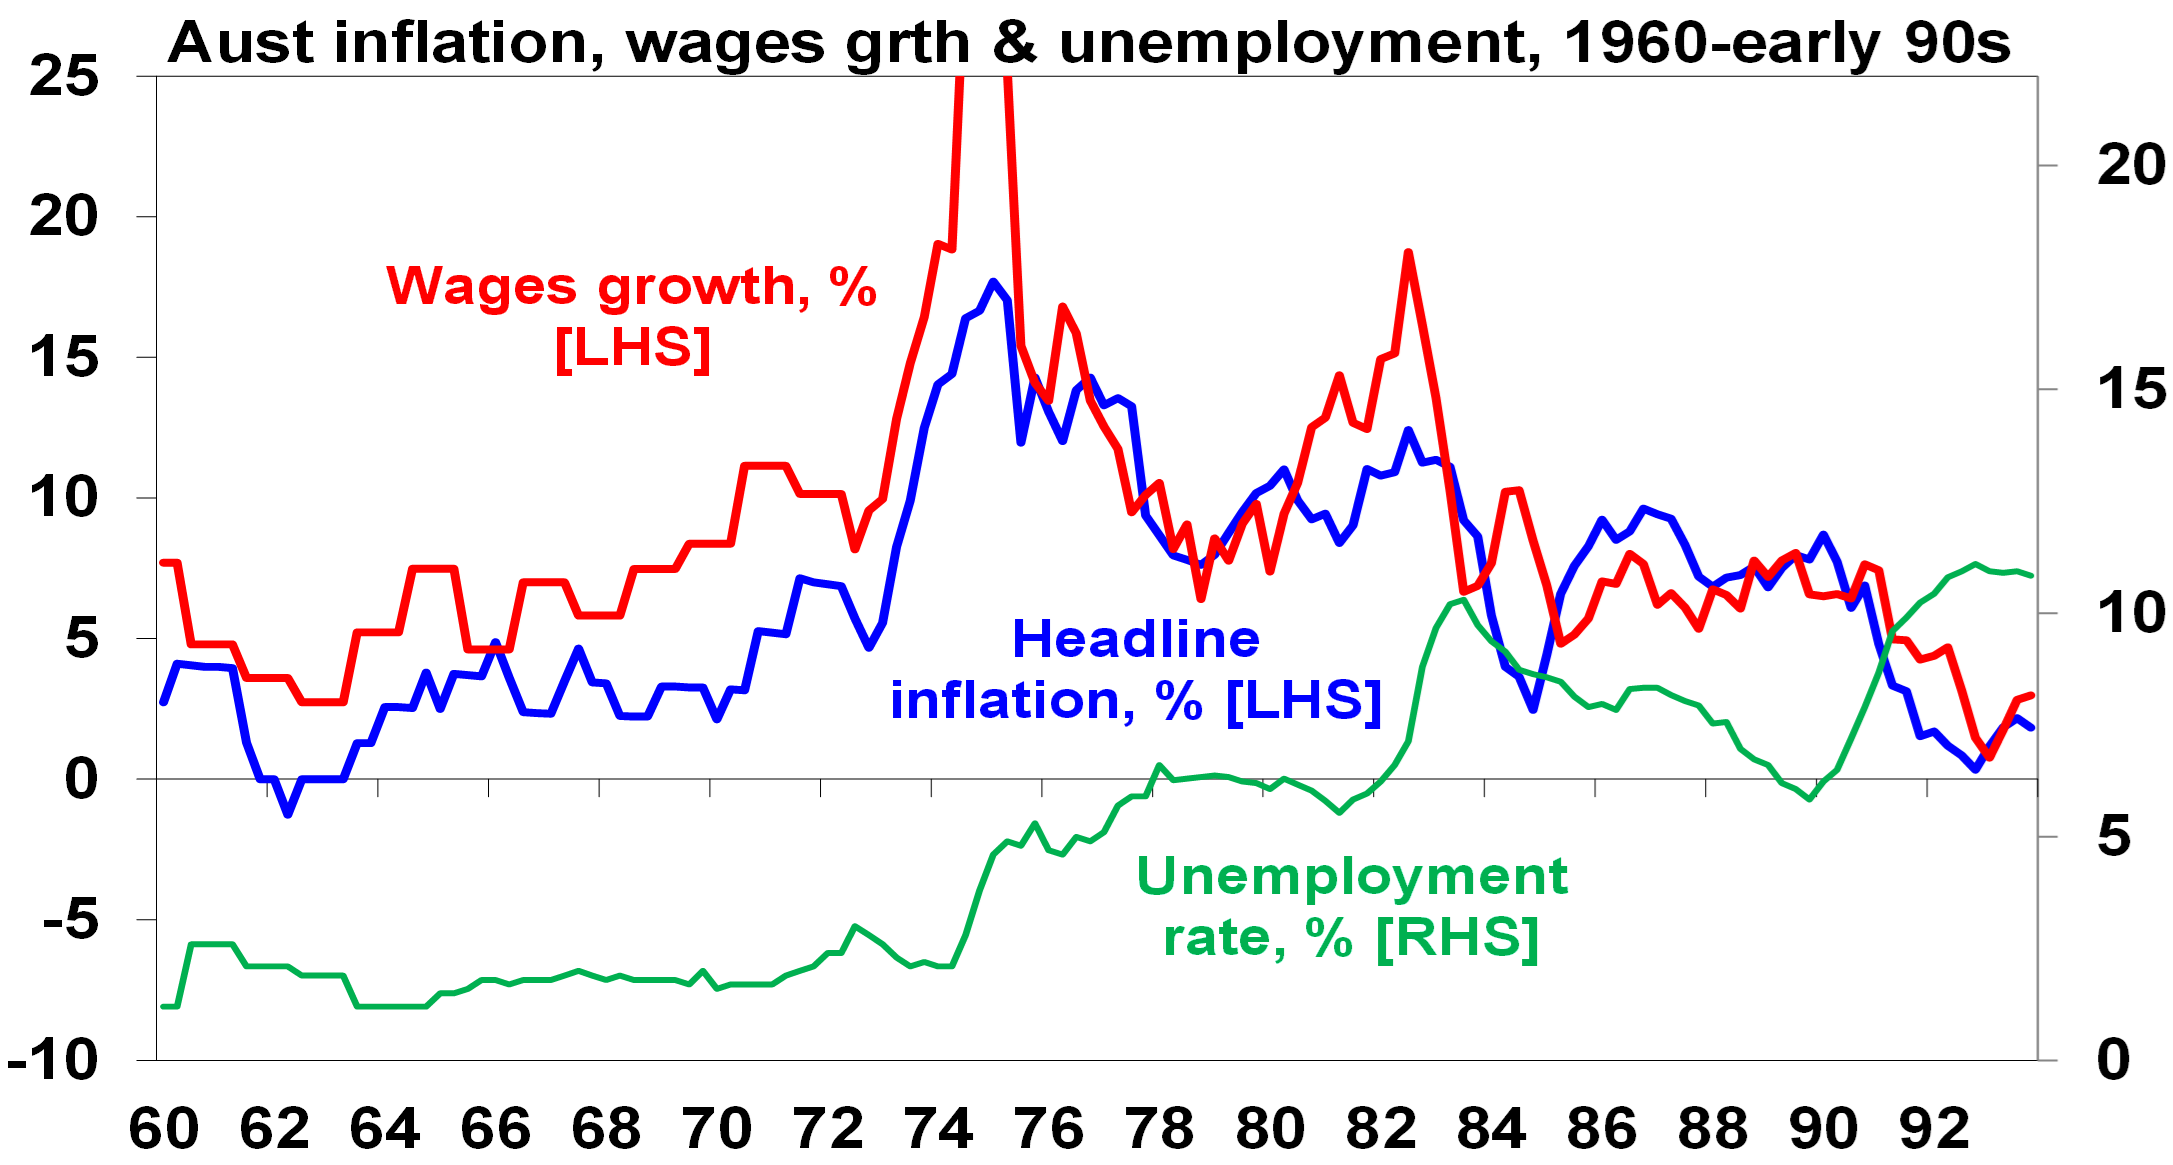 Australian inflation, wates growth and unemployment 1960s-1990s